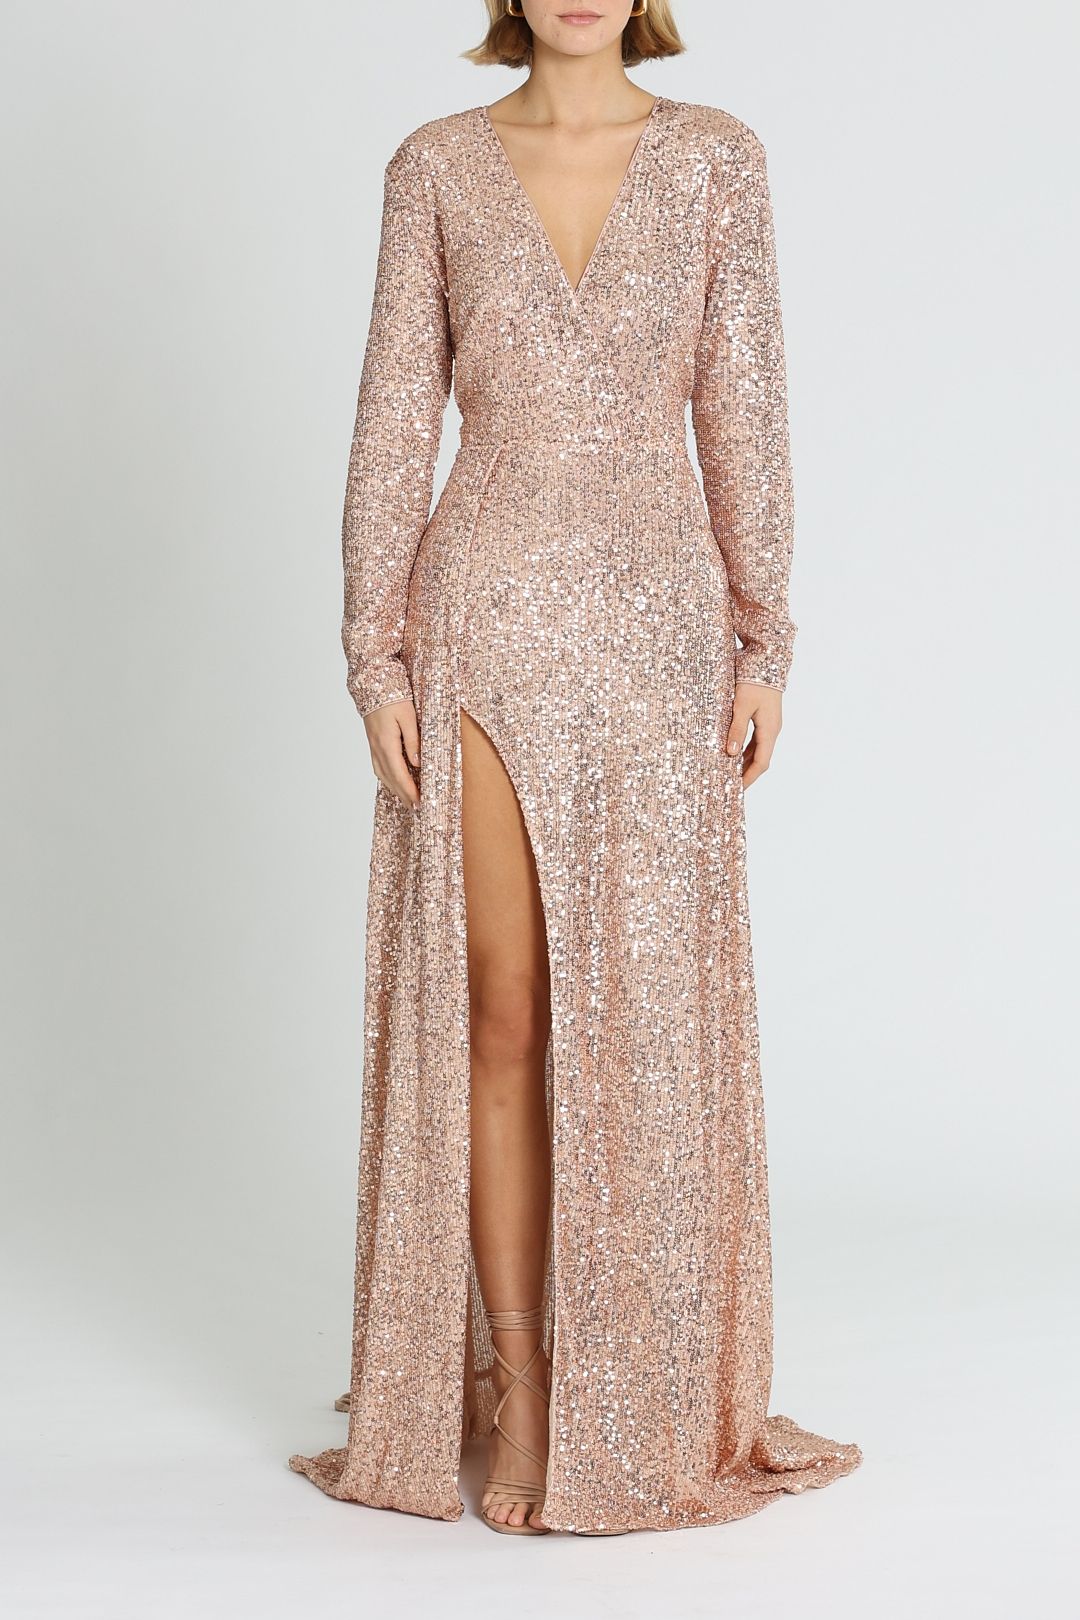 Elle Zeitoune Fontaine Long Sleeve Gown Rose Gold Sequin